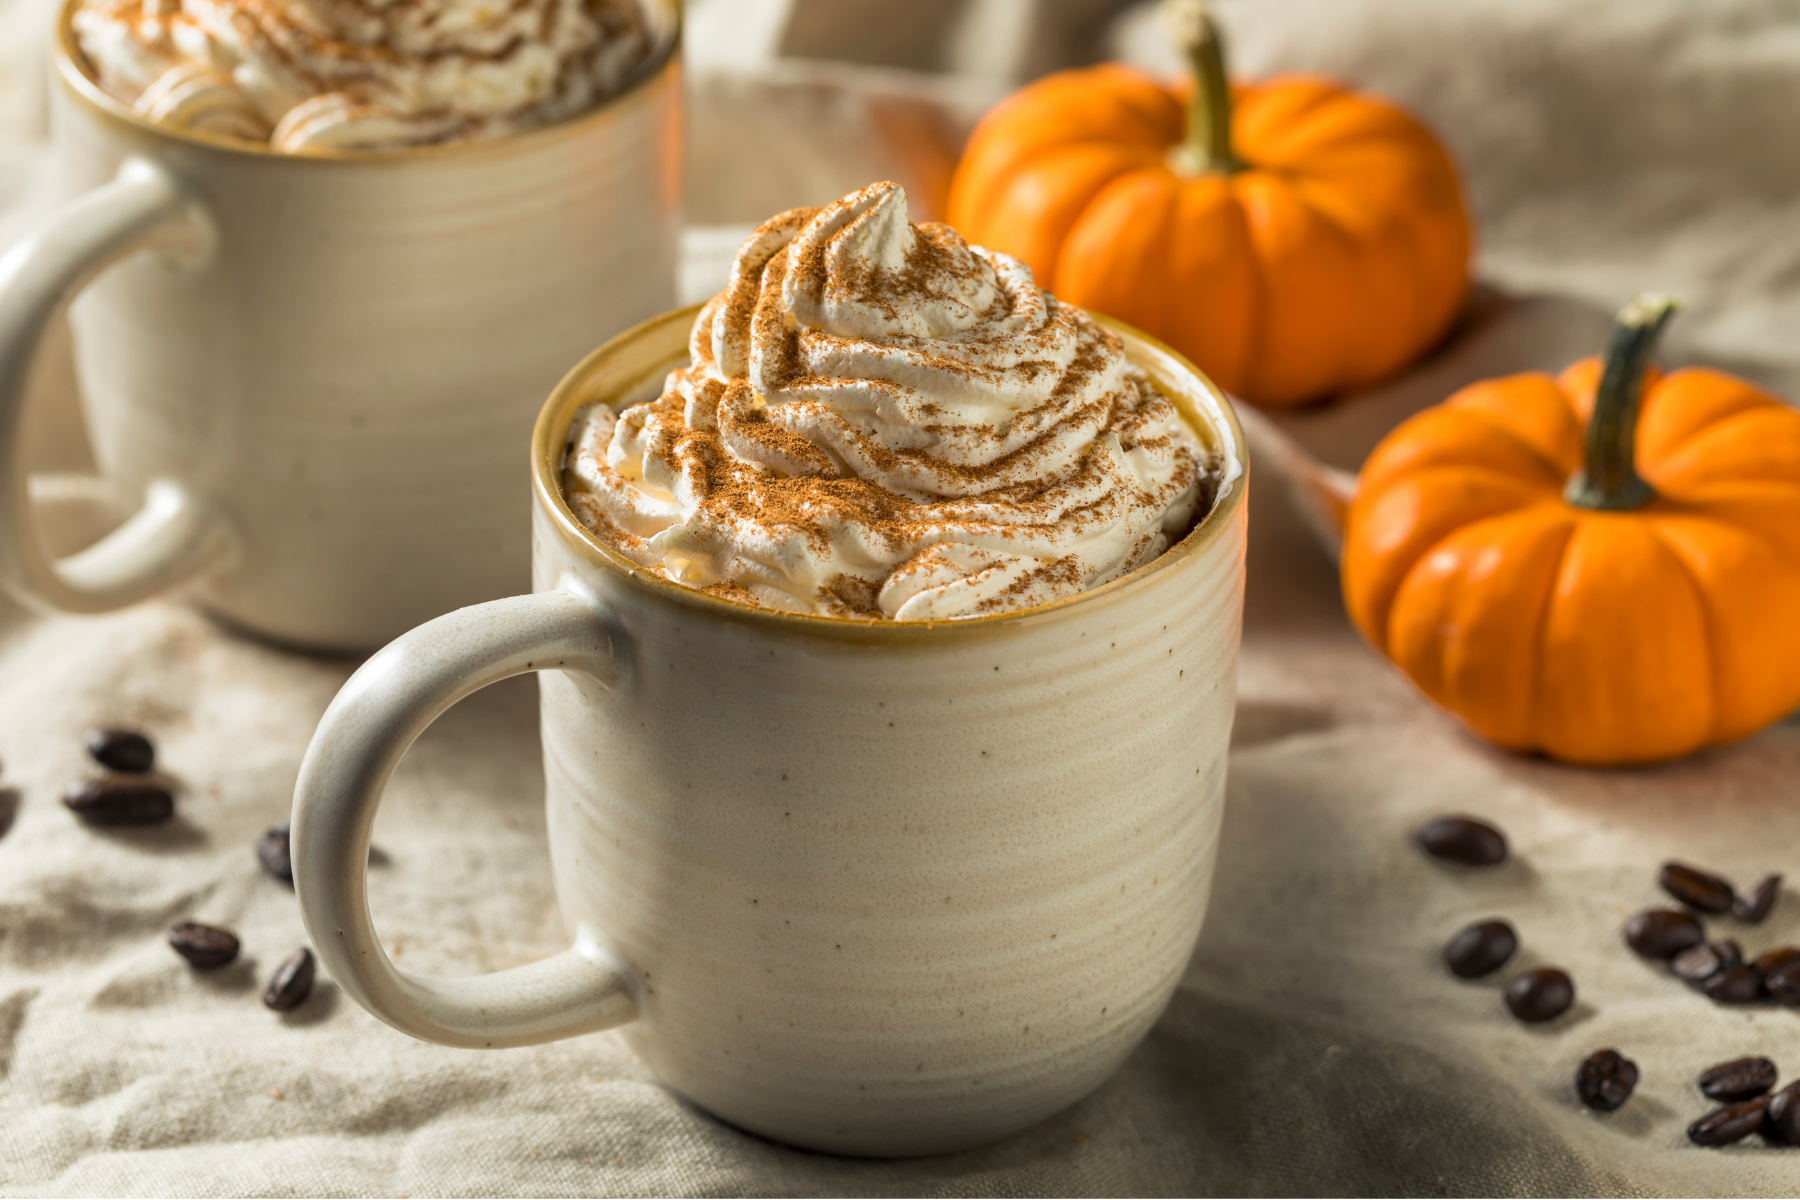 The Pumpkin Spice Obsession How Did We Get Here?